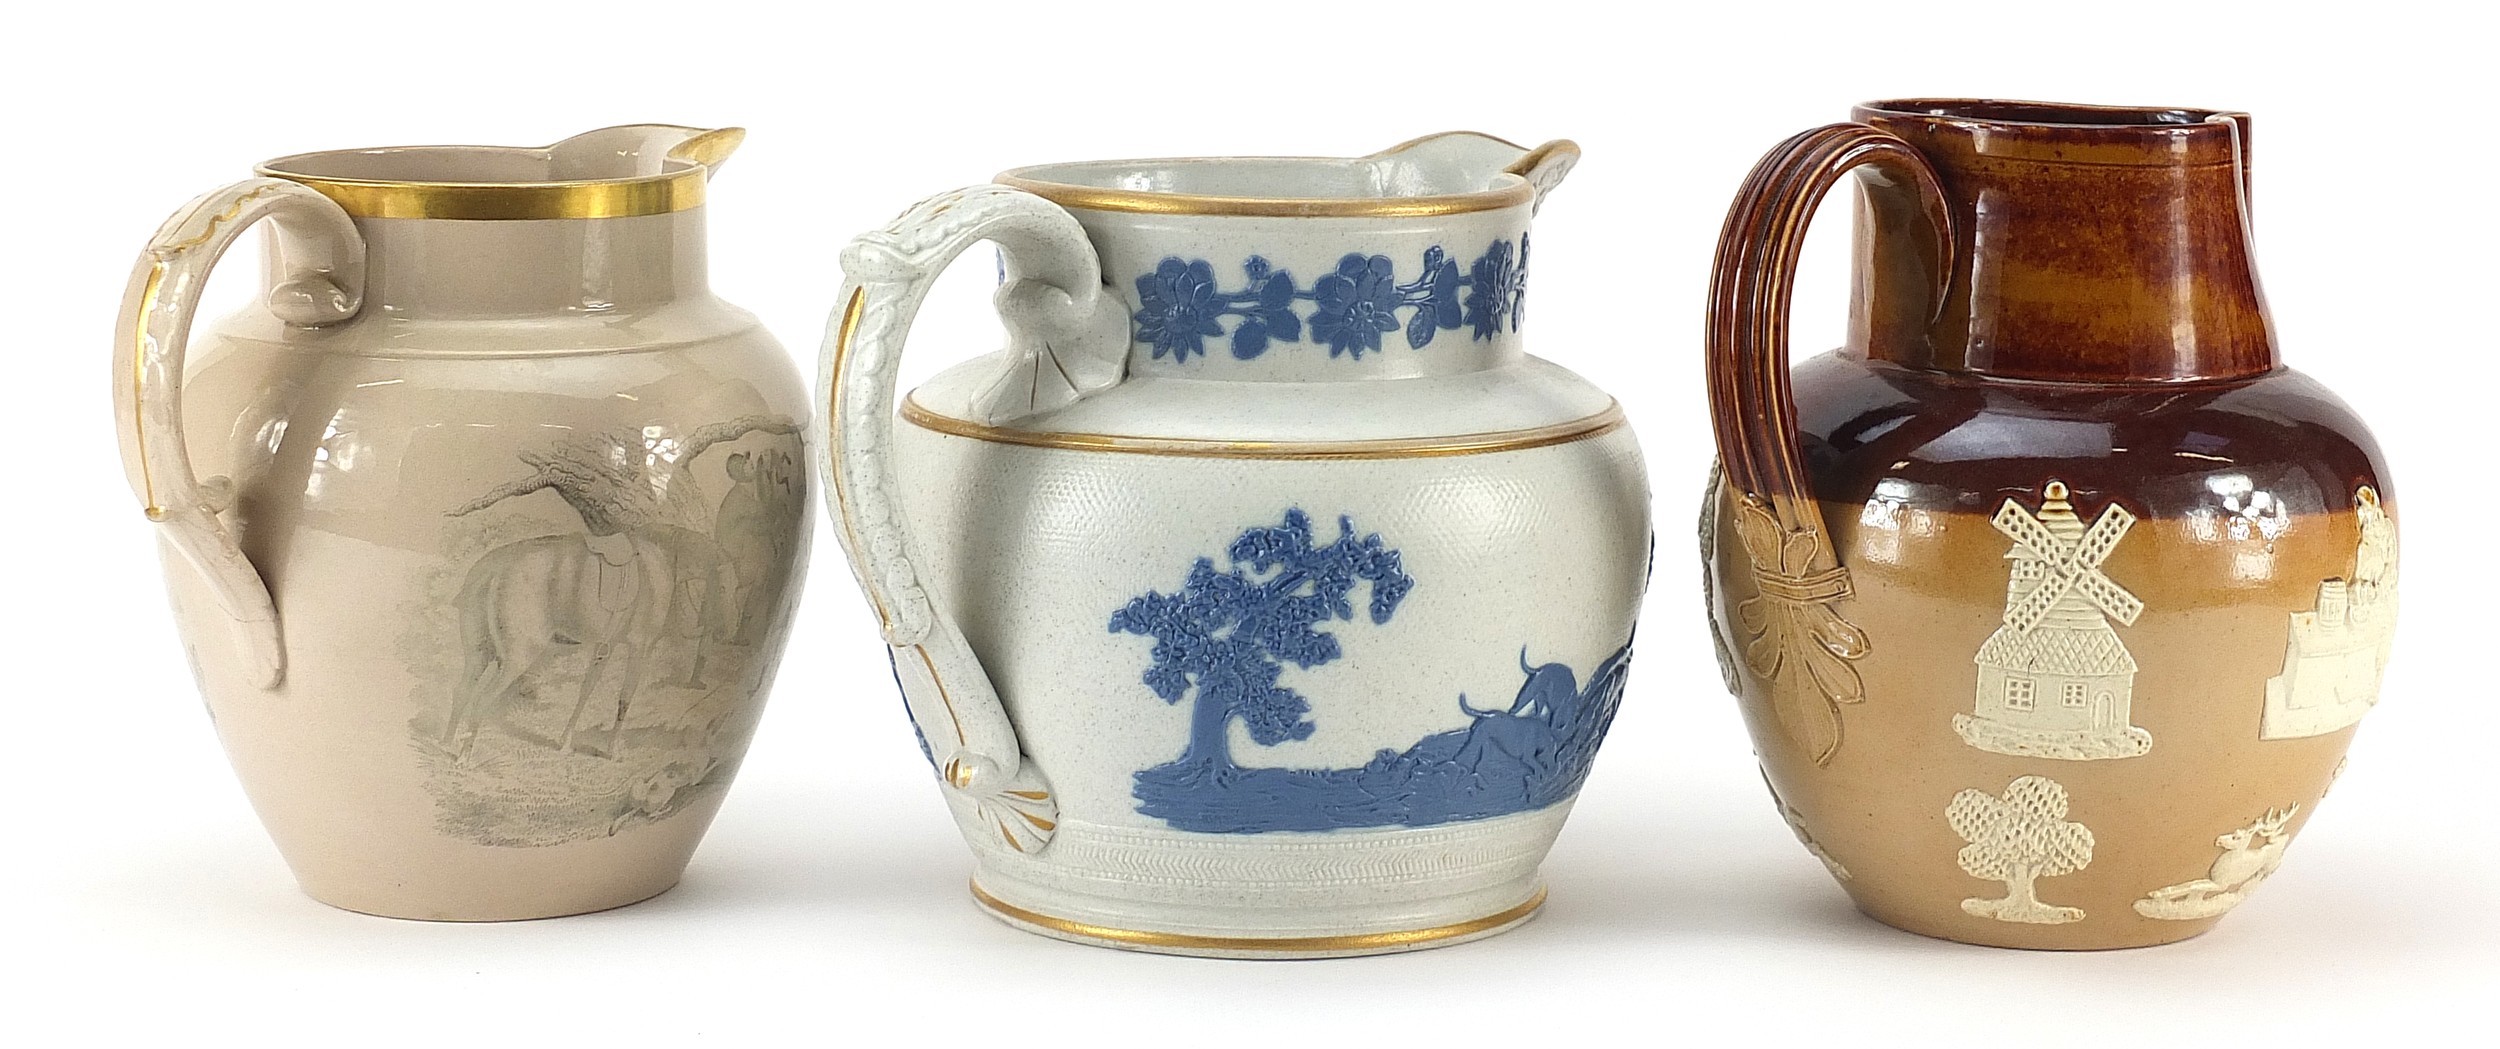 Three 19th century and later hunting interest jugs including an example with applied sprigging, - Image 2 of 4